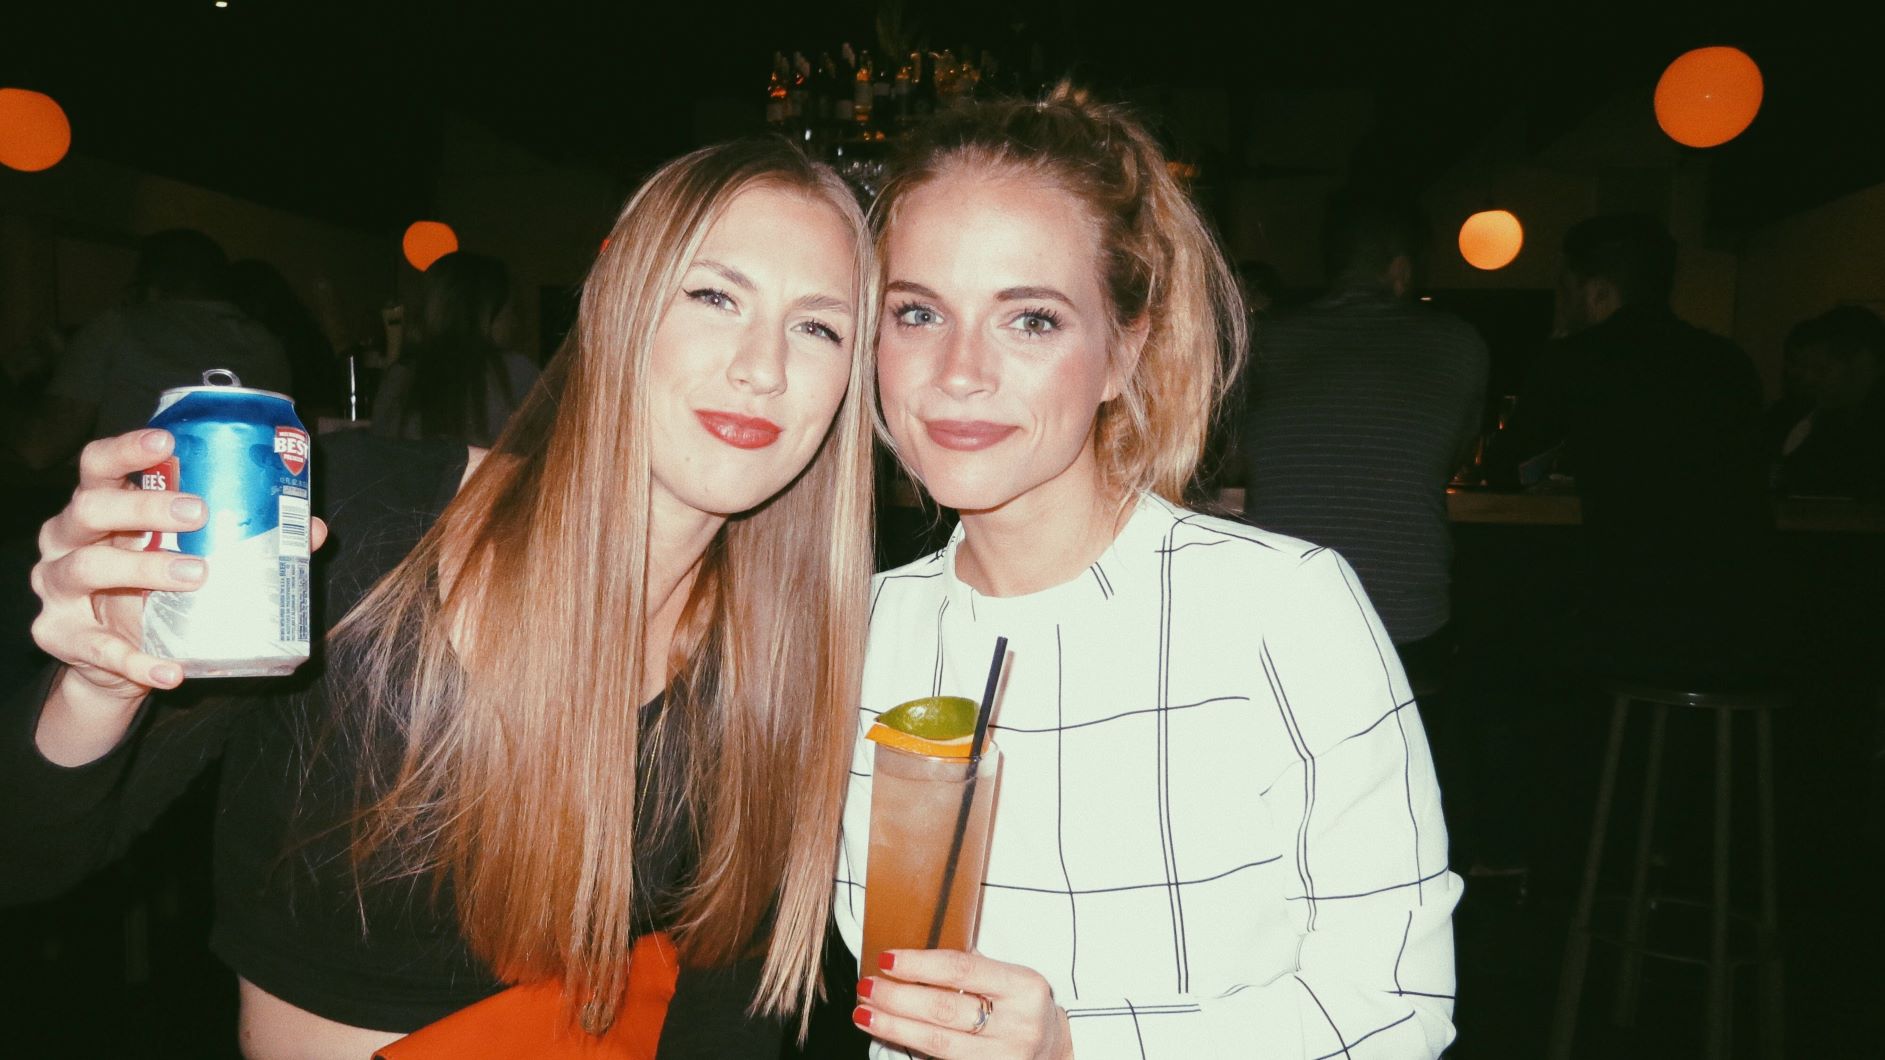 two girls drinking at a bar